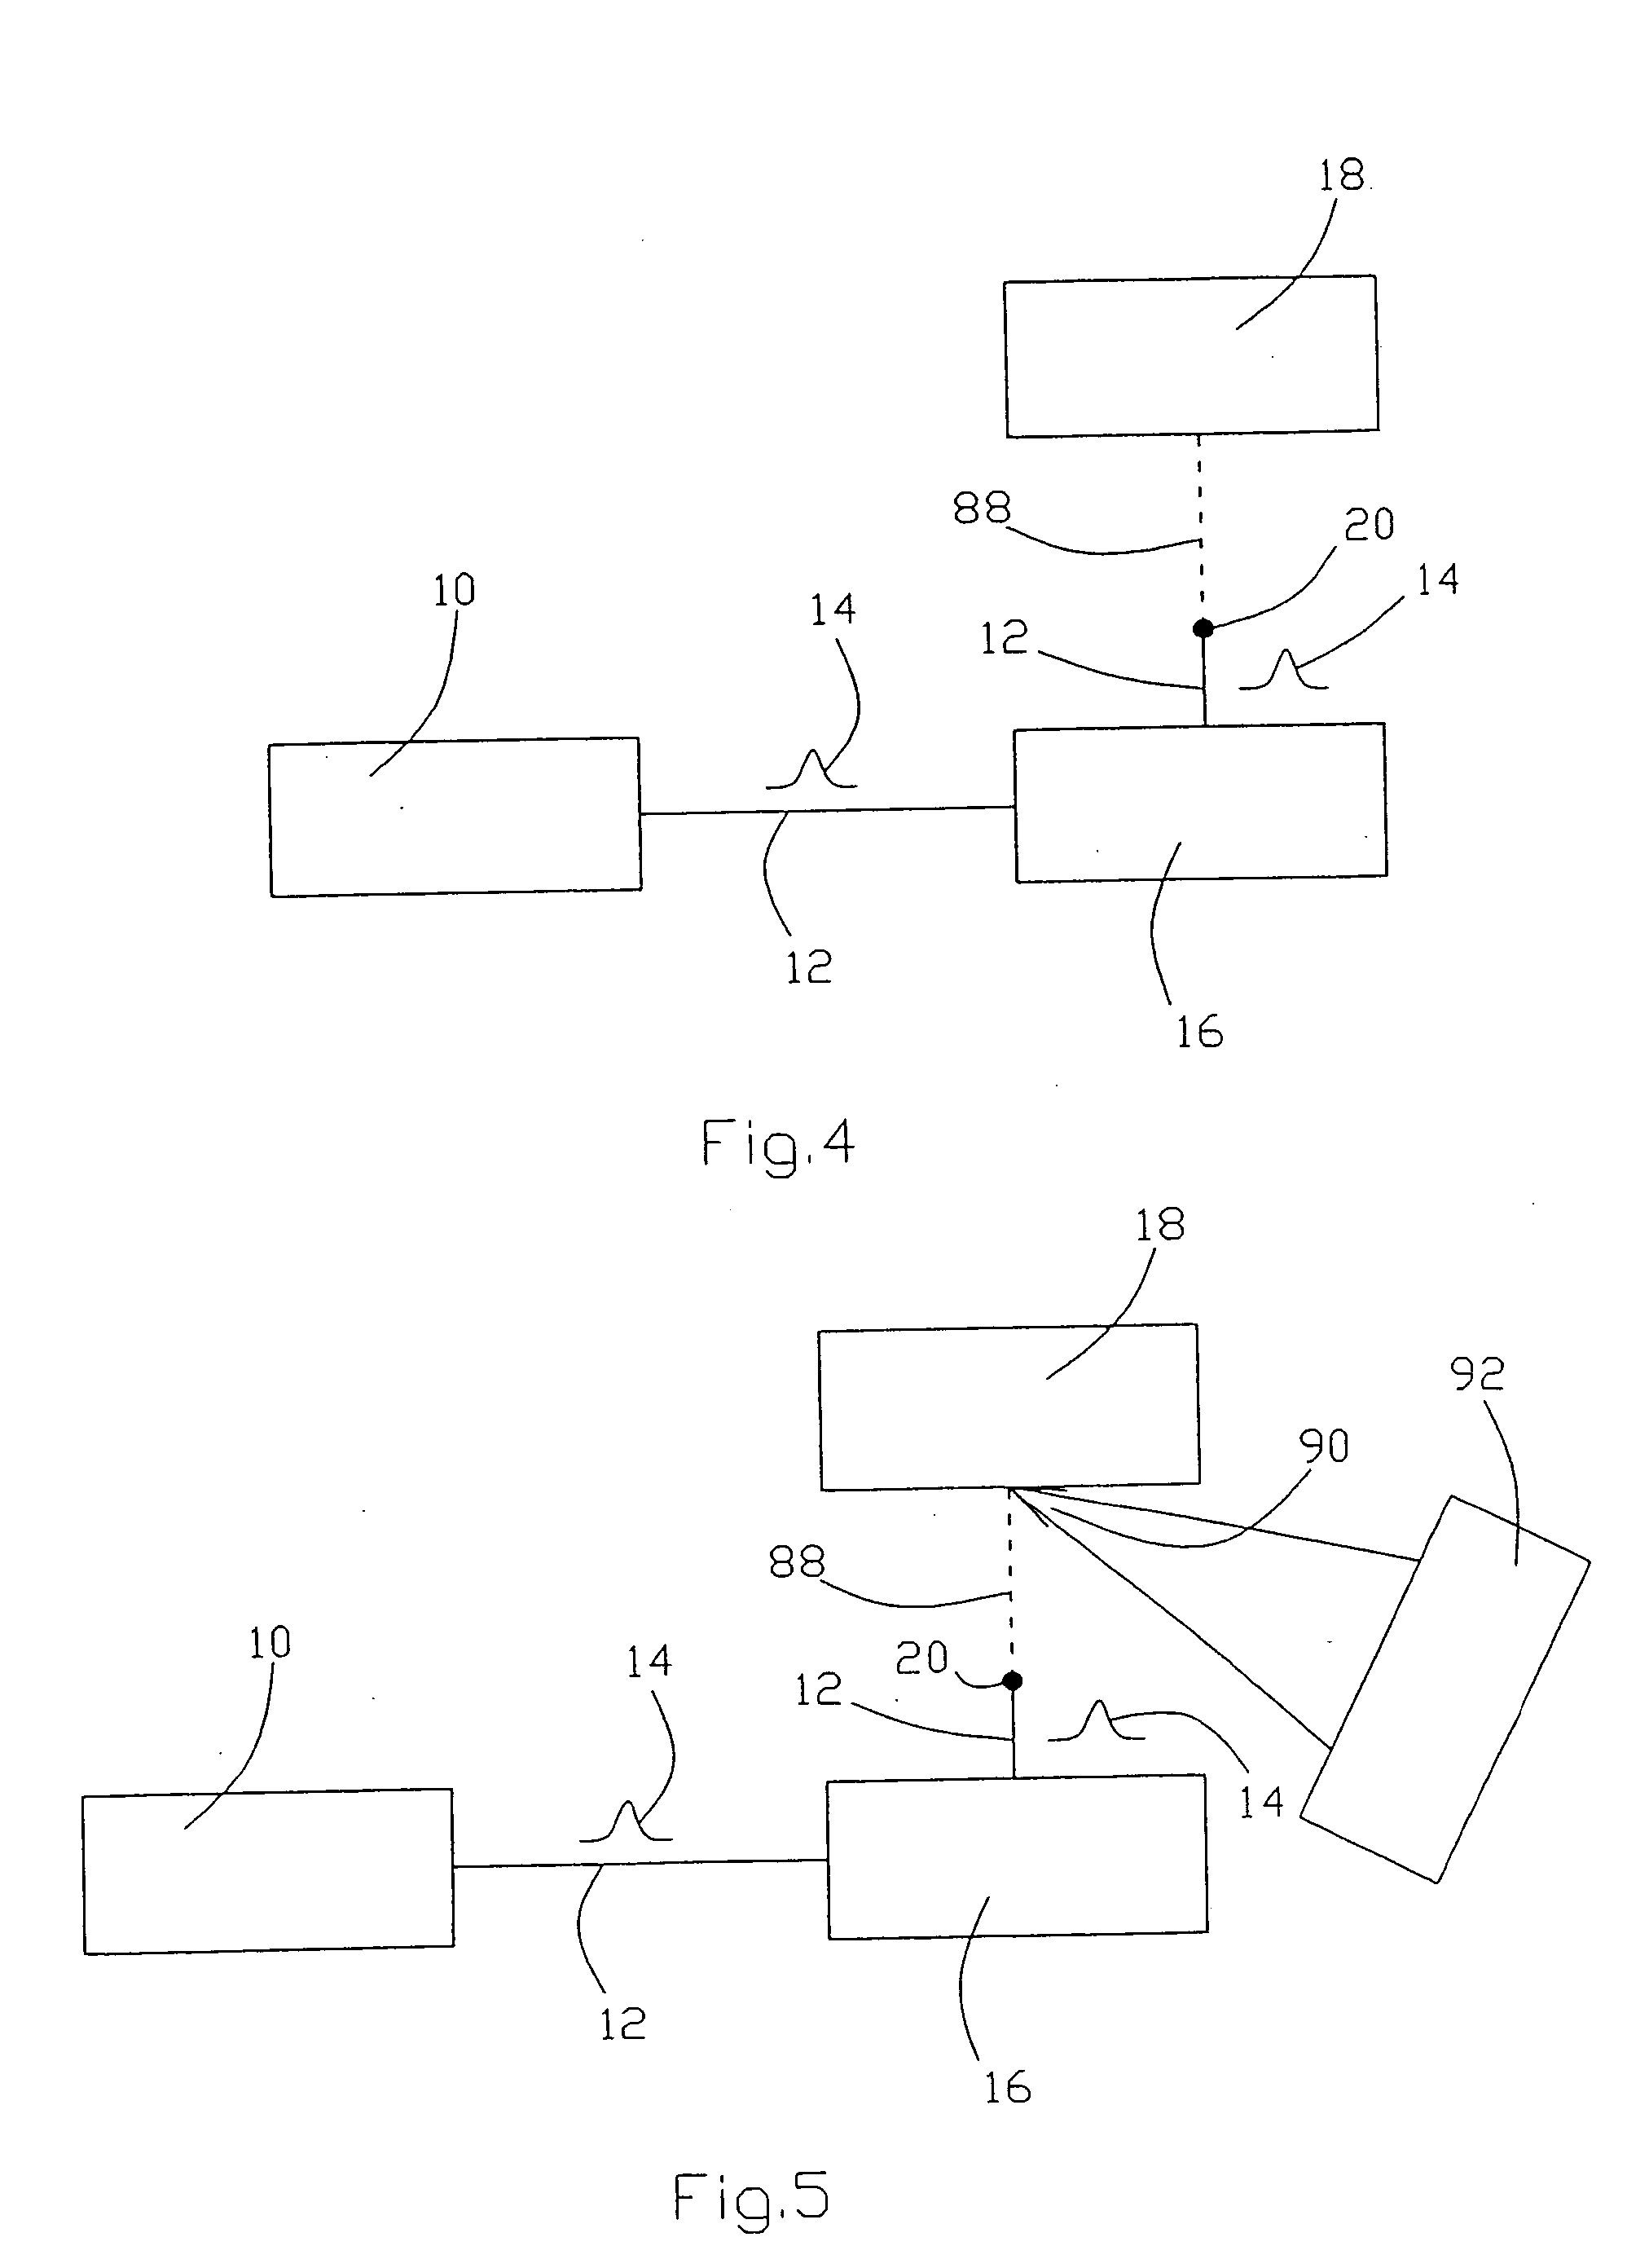 Method for material processing and/or material analysis using lasers